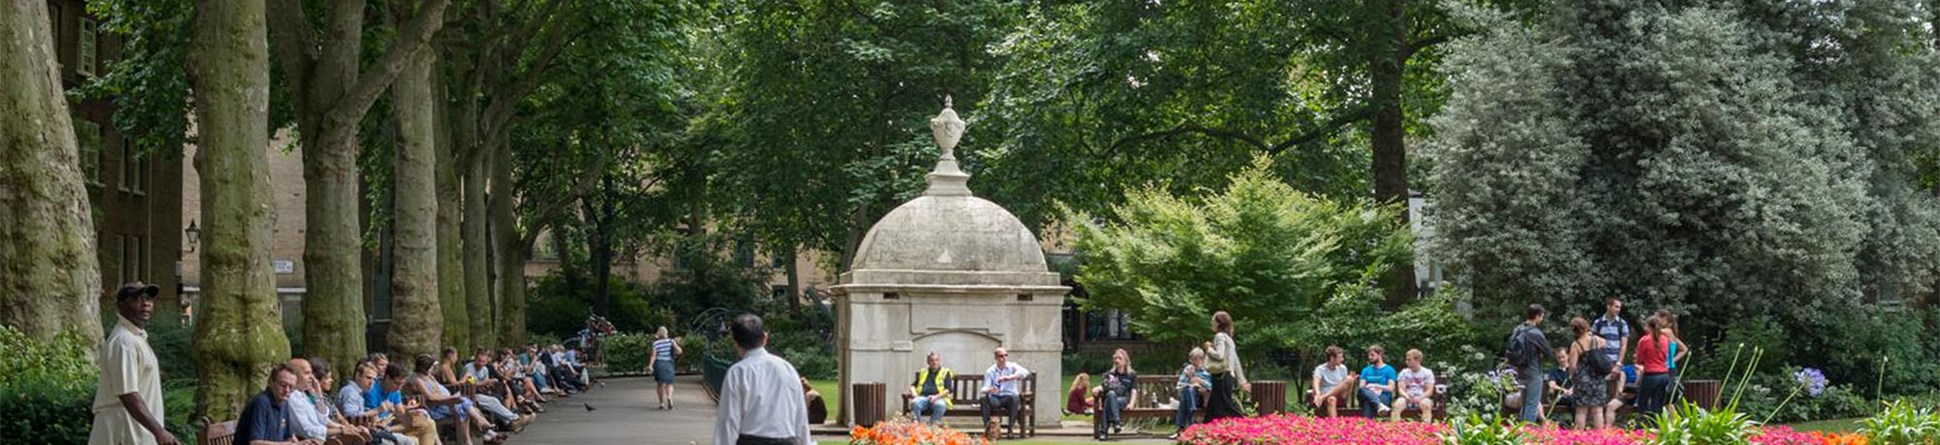 People seated on benches around flower beds in a park with a mausoleum in the background